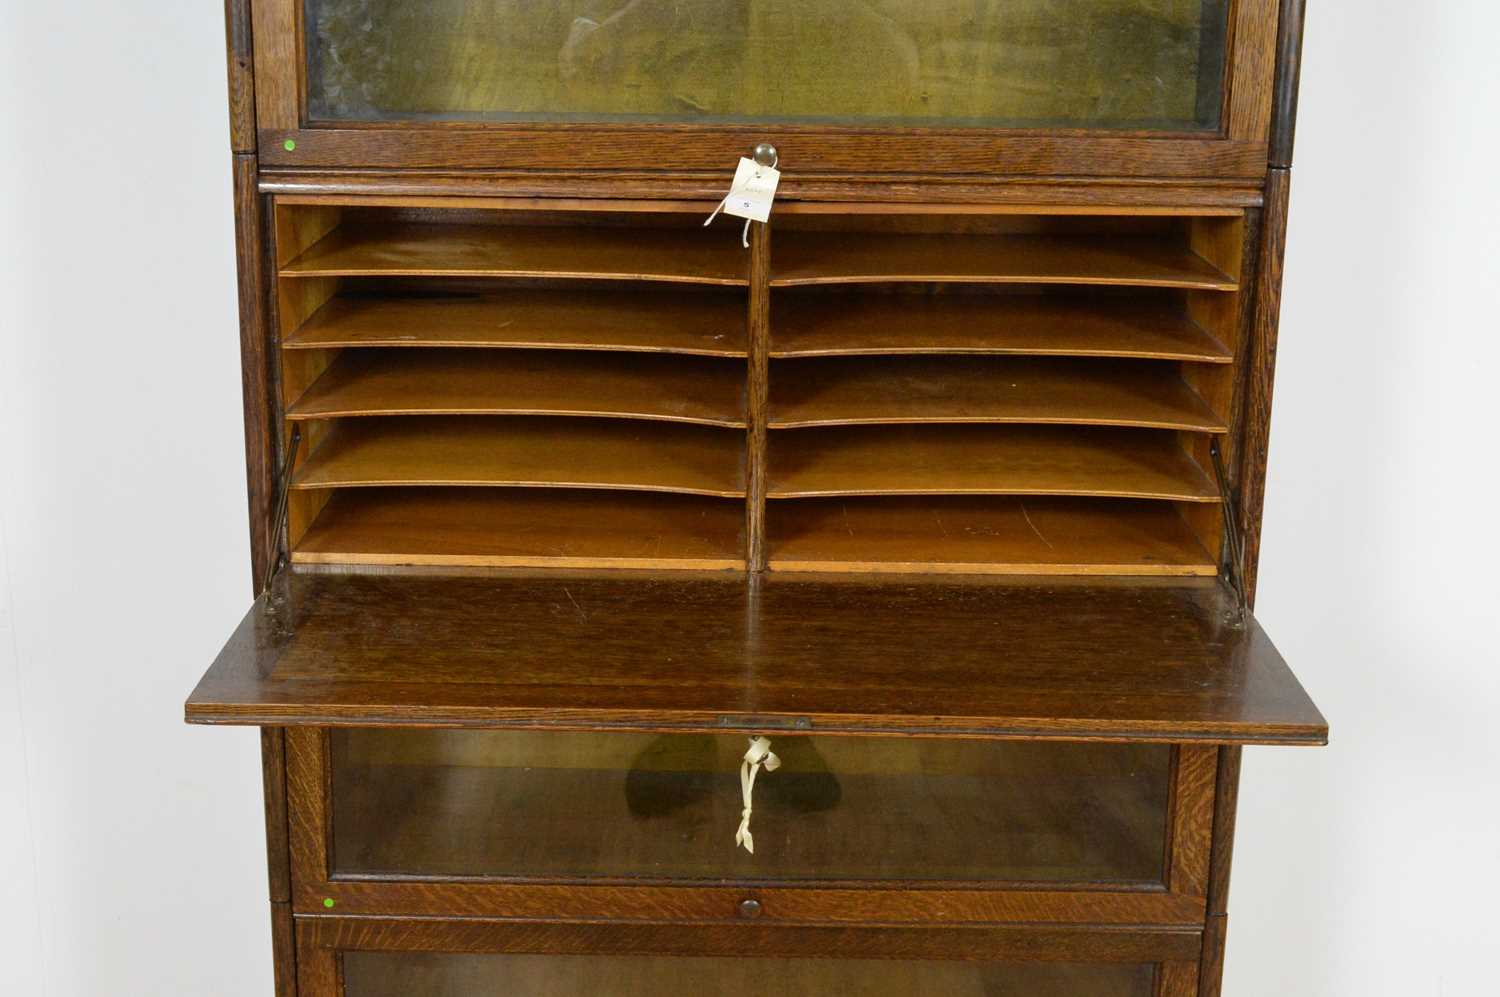 An early 20th Century five tier Globe Wernicke style bookcase - Image 4 of 4